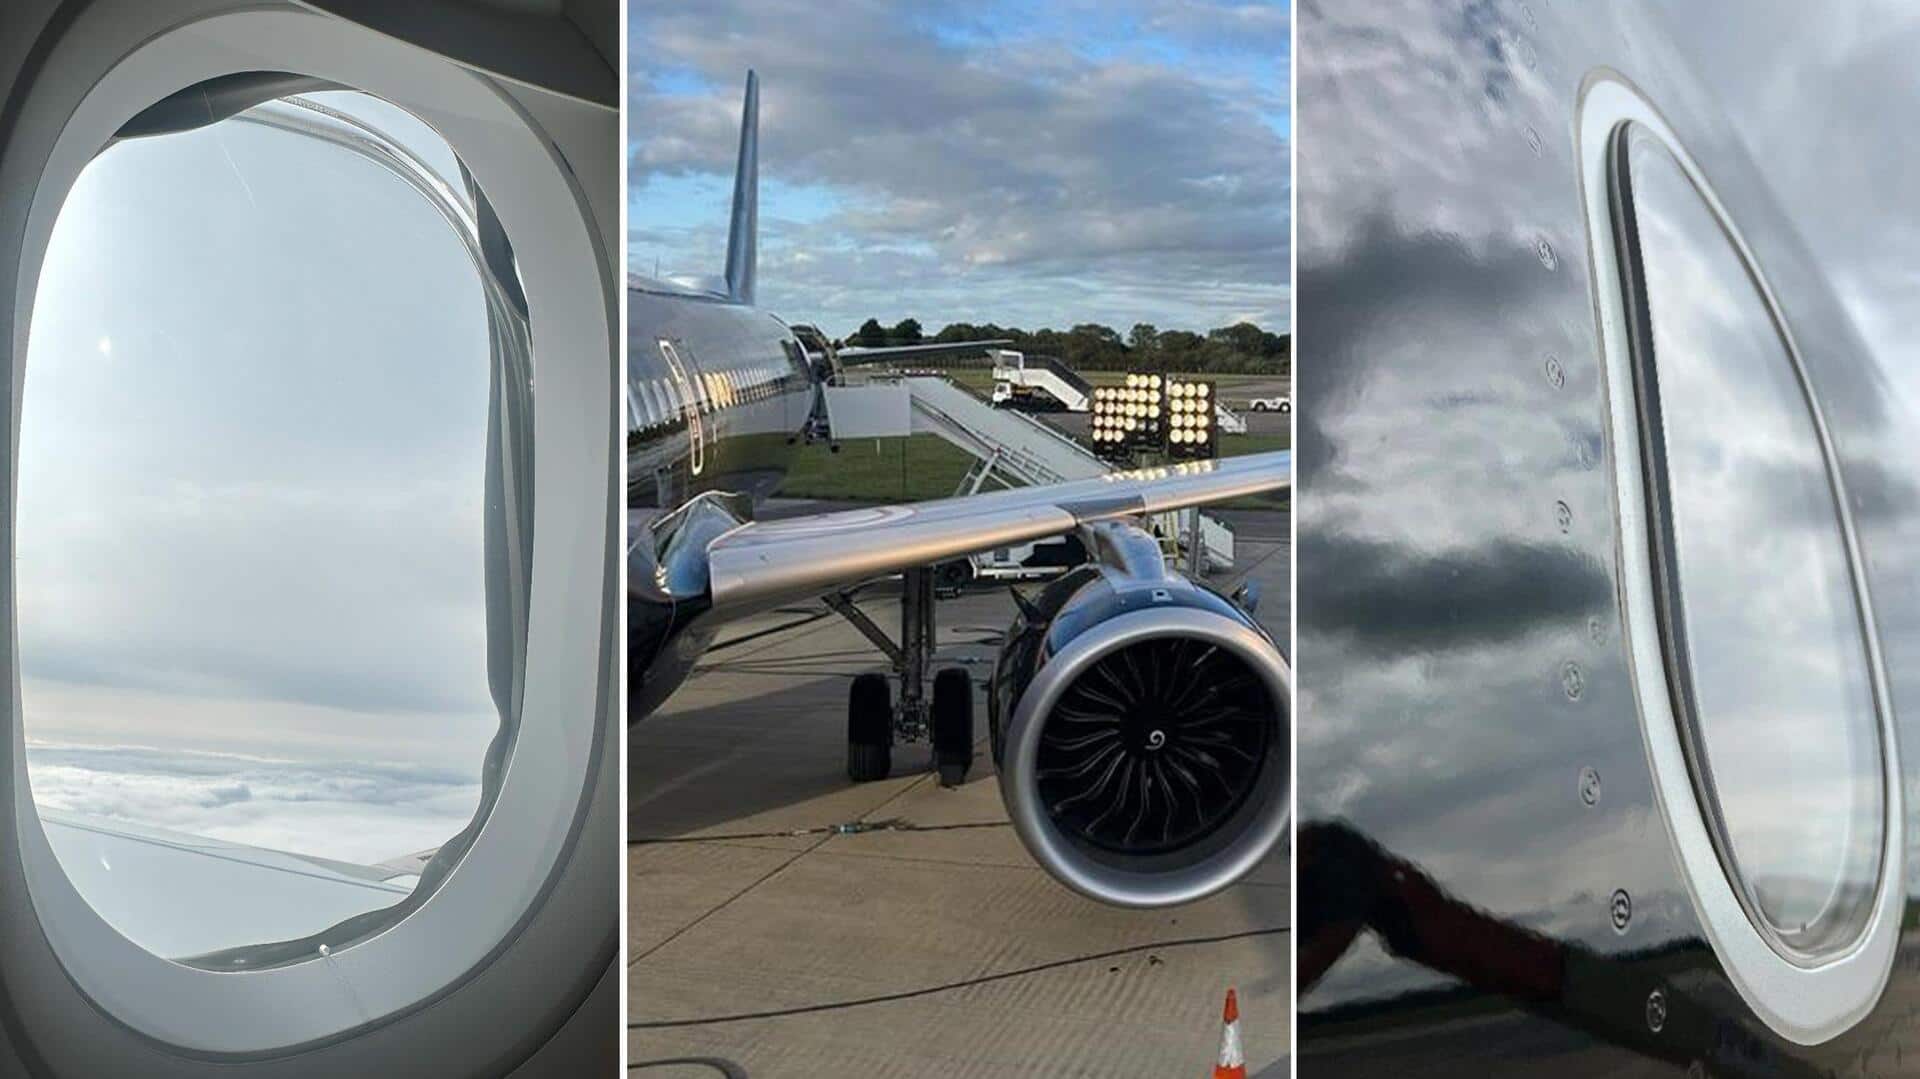 London: Flight departed without windows, crew noticed it mid-air